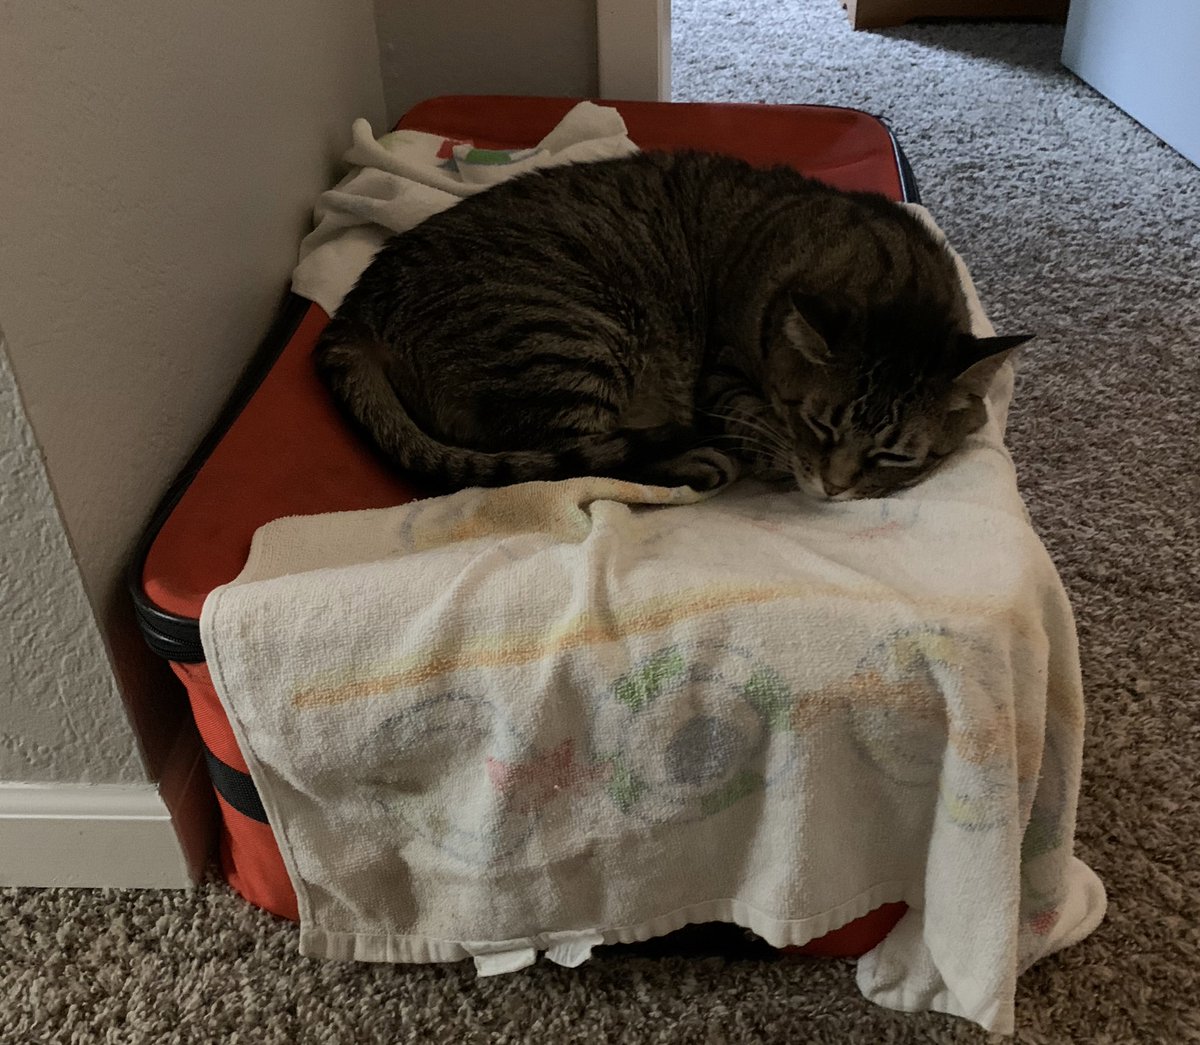 Cat picture of the day (a new thing I’m starting): this is Jack. He LOVES suitcases. Way back in his kitten days, I had no furniture and he slept in my suitcase where I stored my clothes. Today 10.5 years later, Jack still thinks a suitcase is the best place in the house.